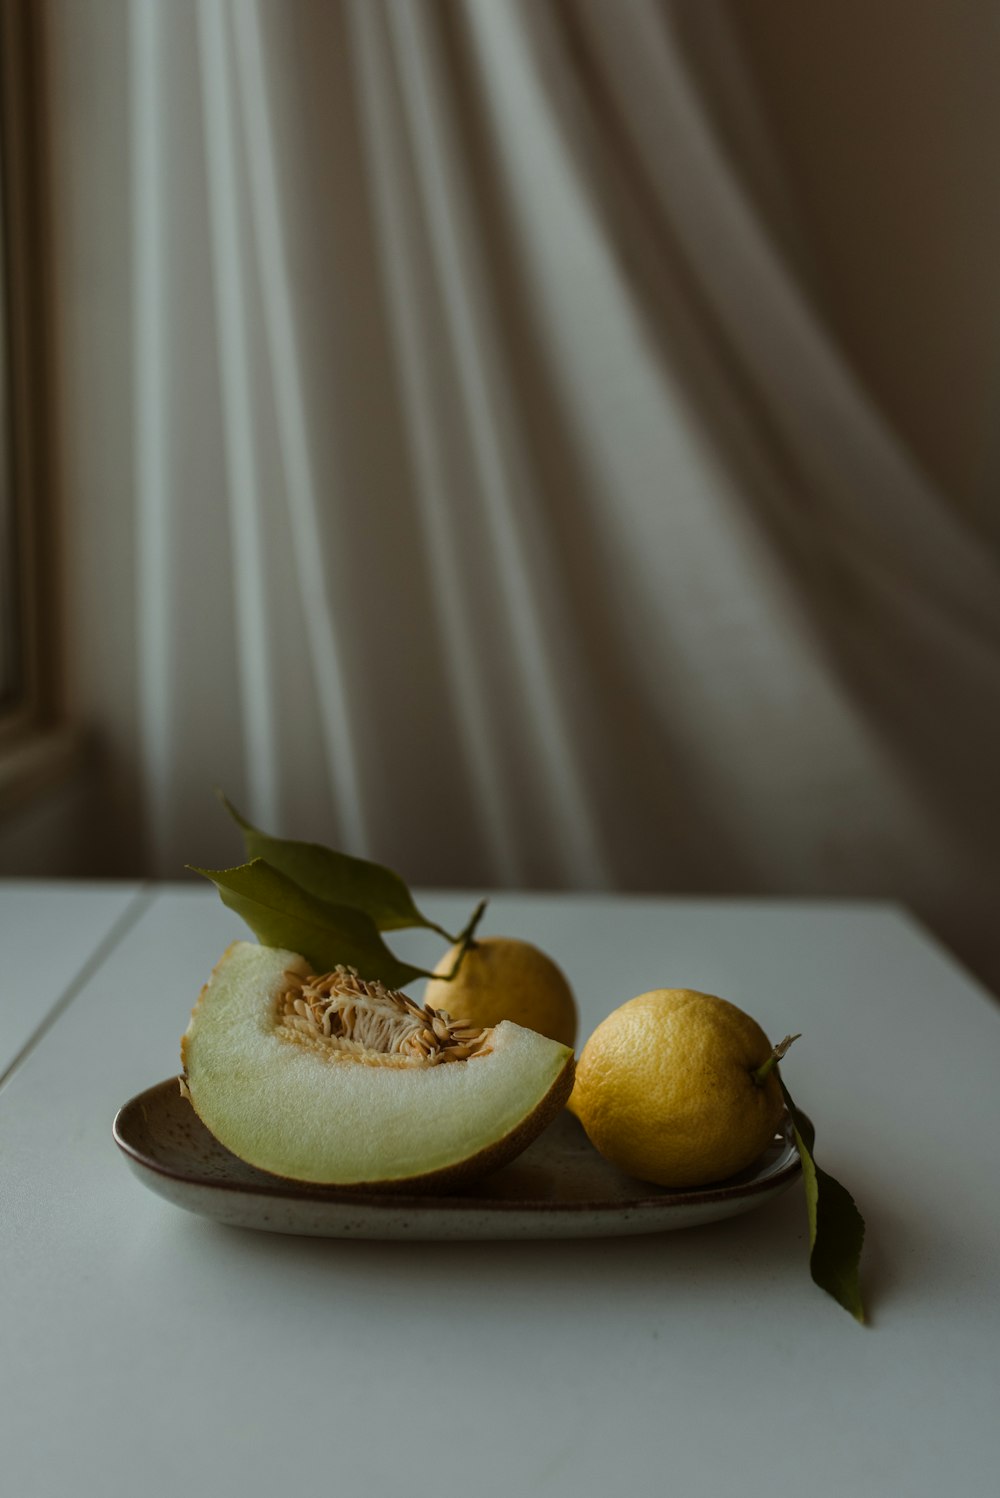 a plate of fruit on a table next to a window